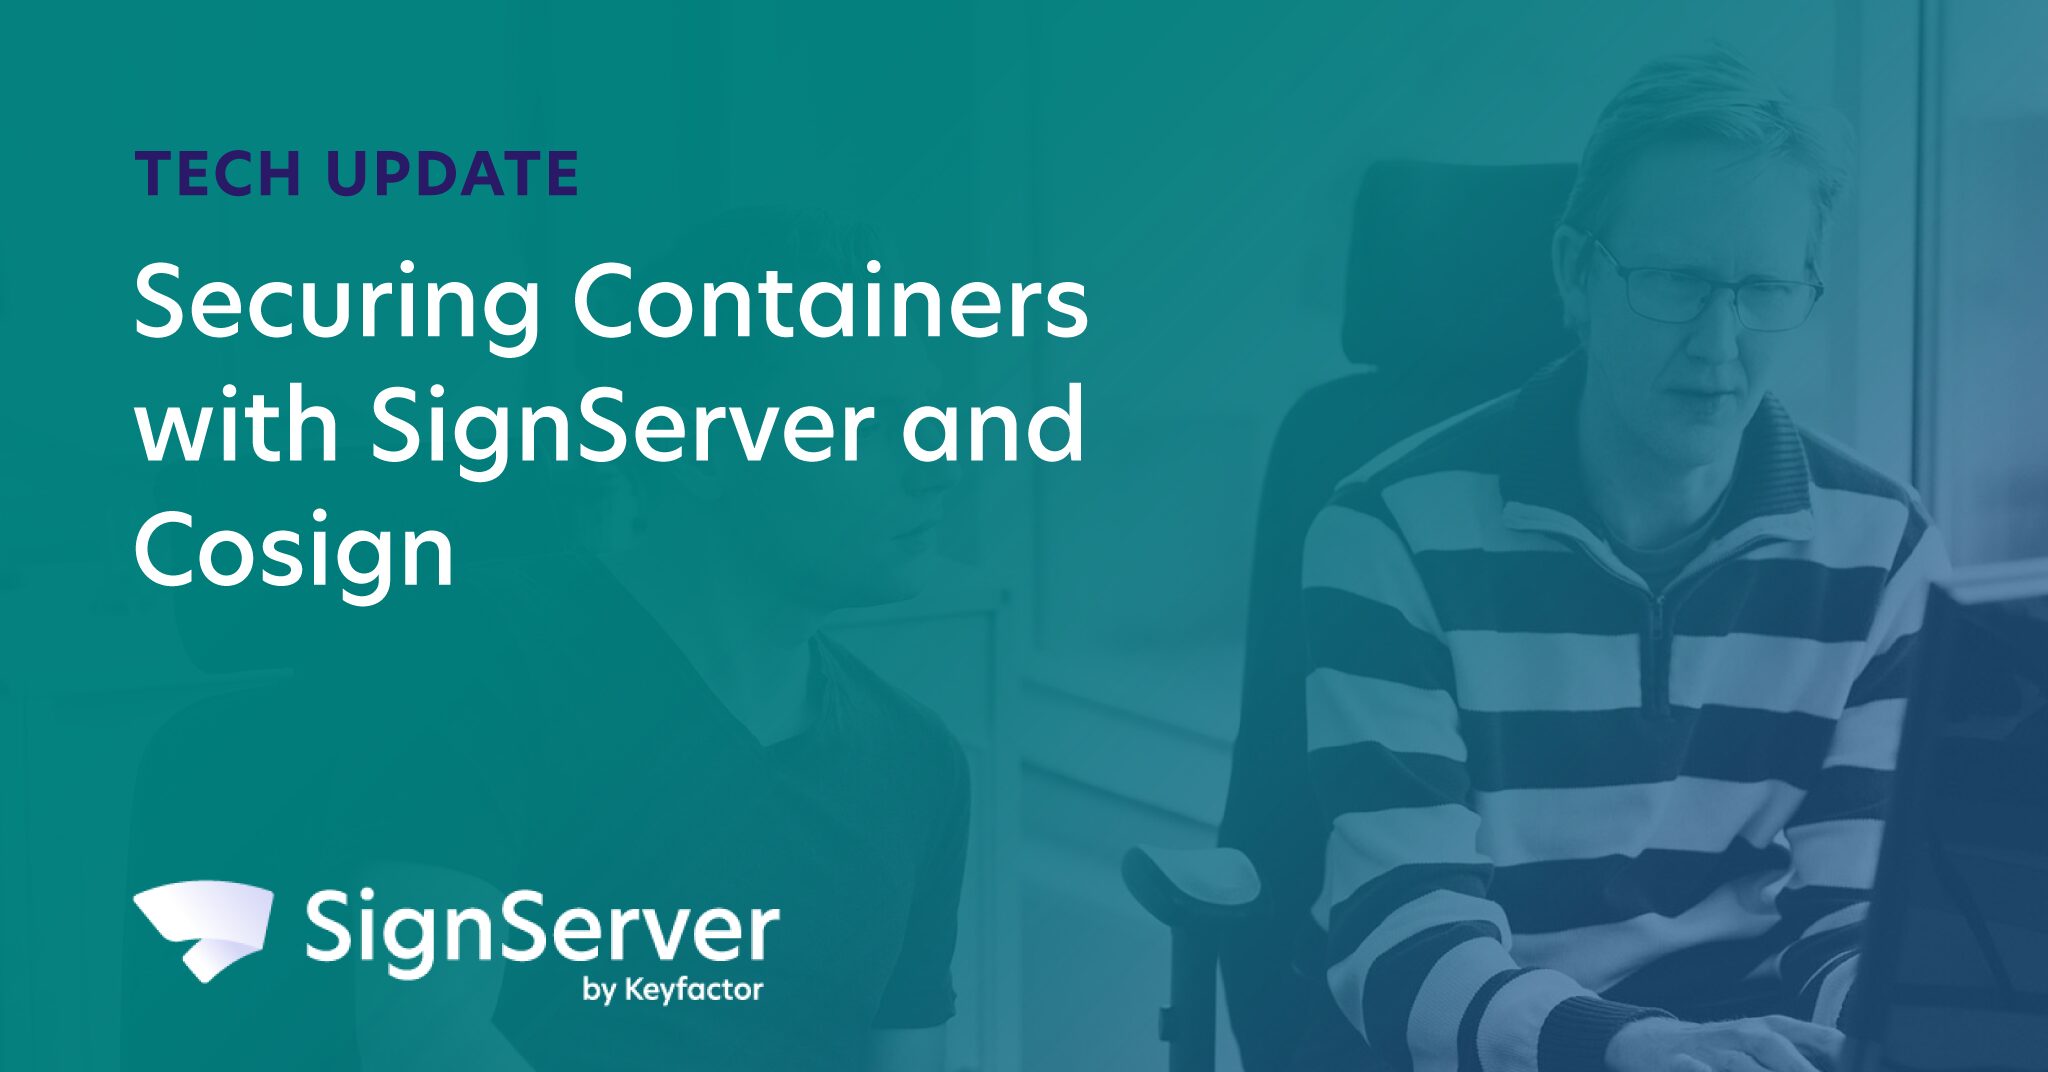 Securing Containers with SignServer and Cosign